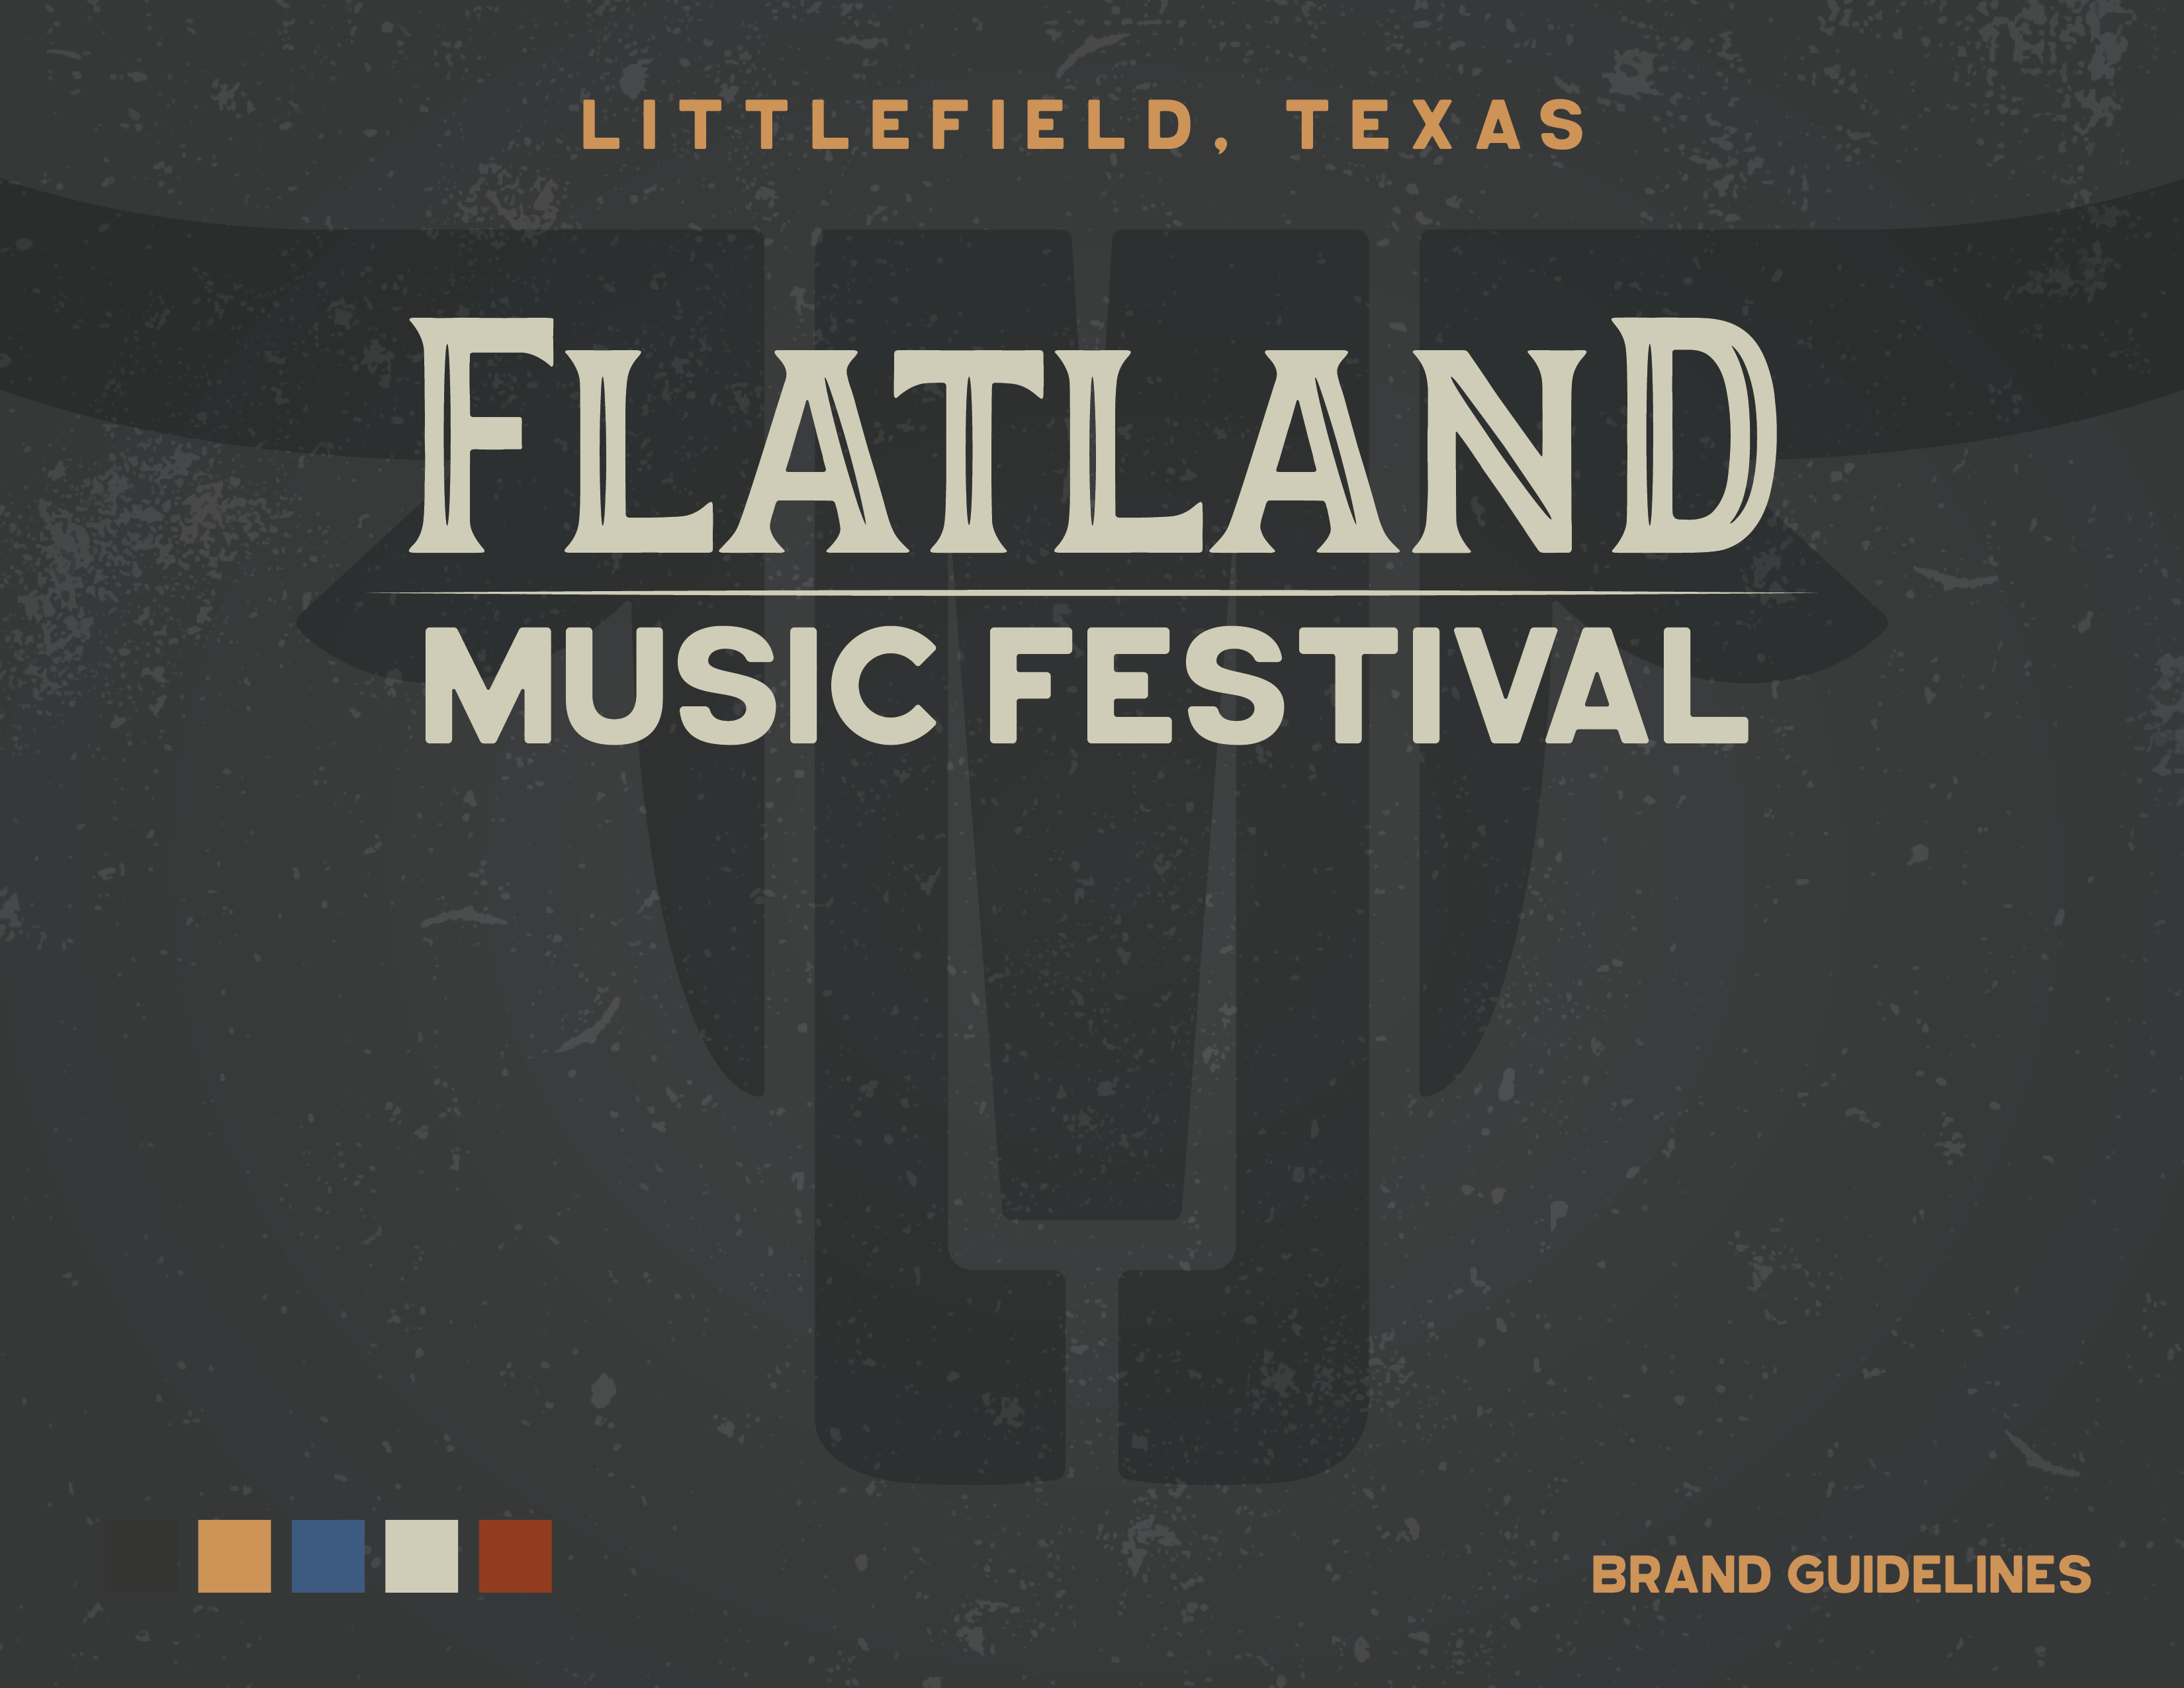 Flatland Music Festival Brand Guideline created by the graphic design studio, Cre8ive